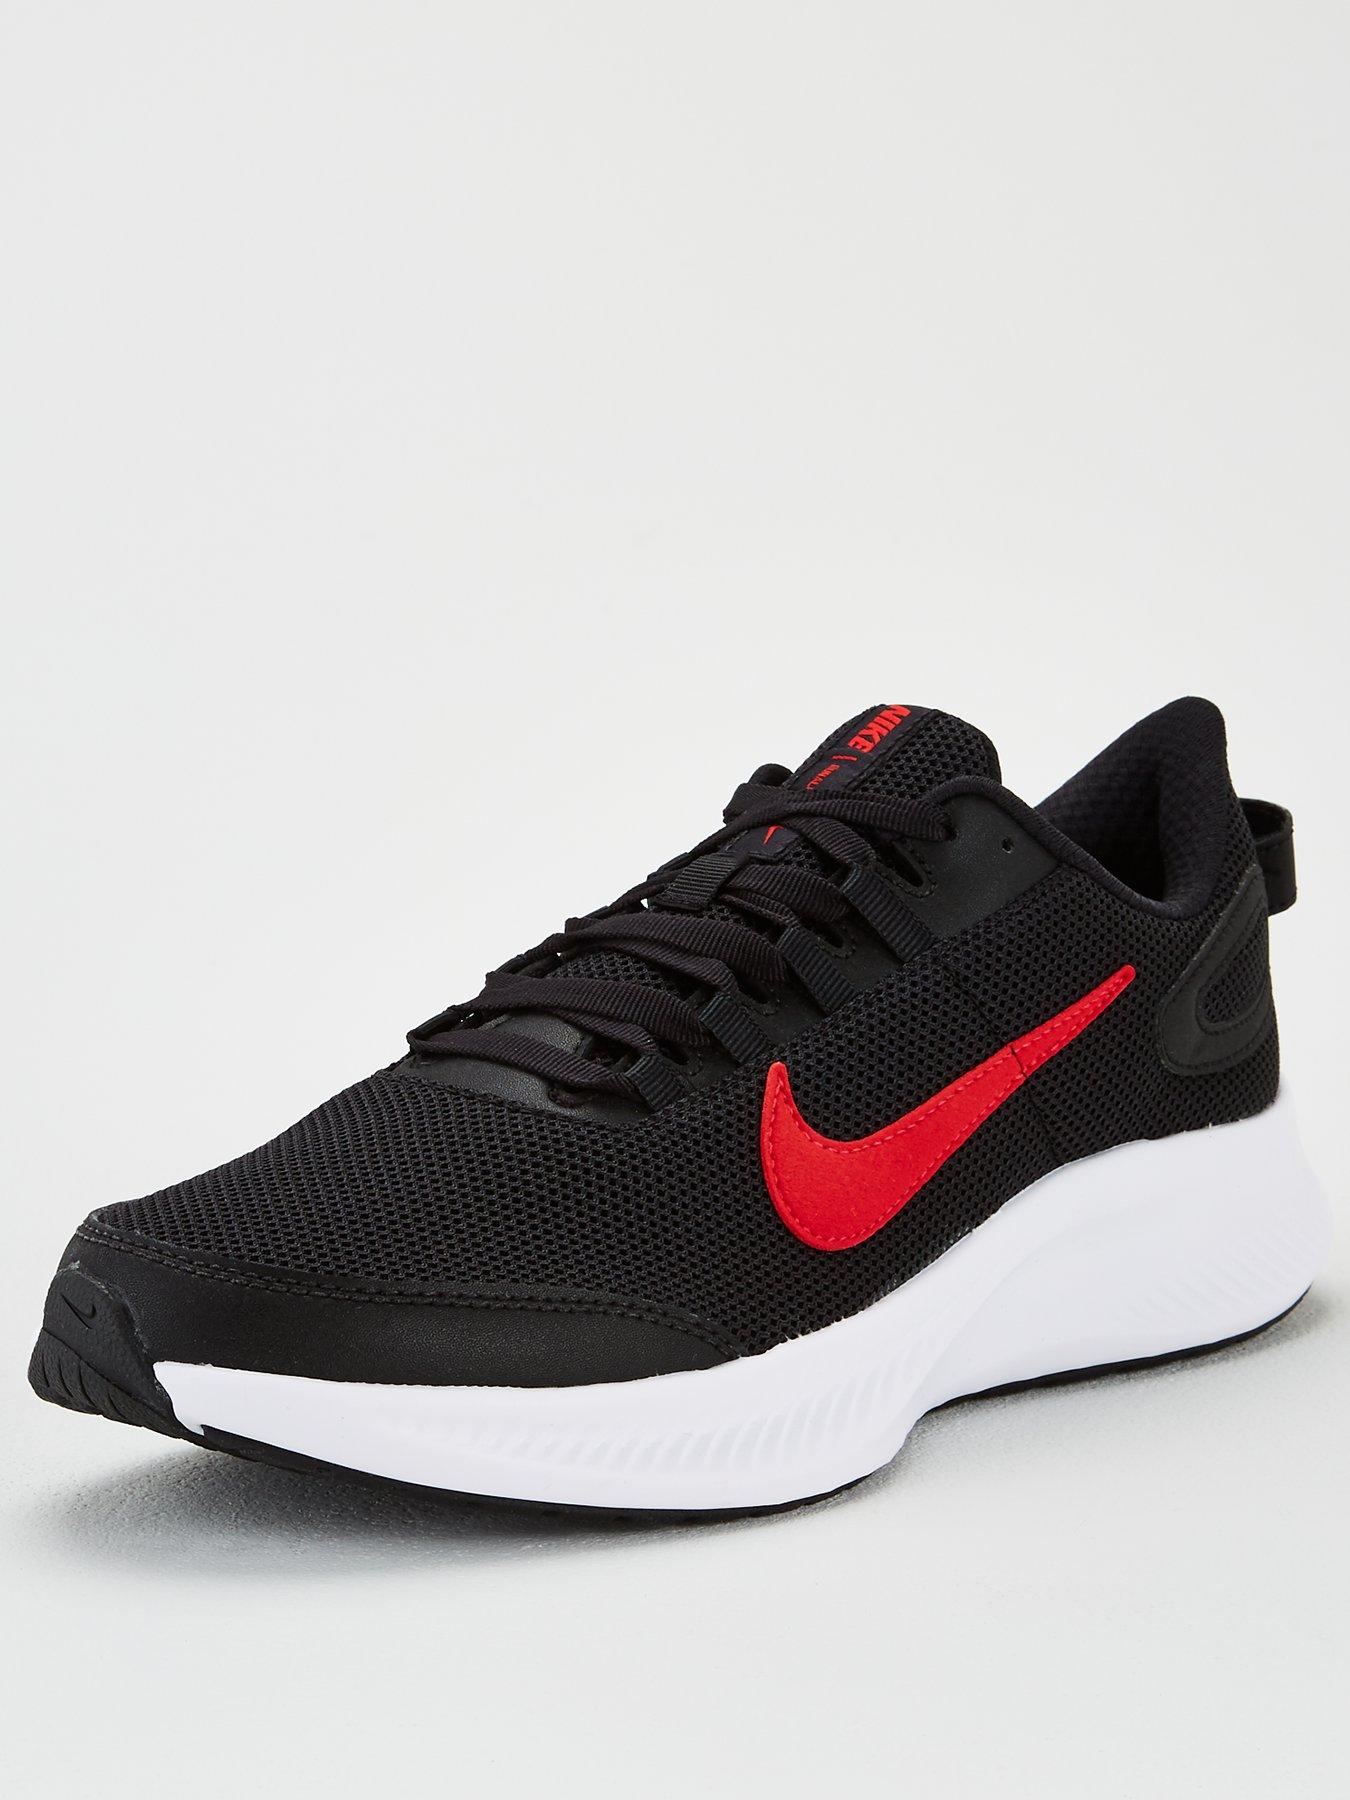 Nike Run All Day 2 - Black/Red | very.co.uk